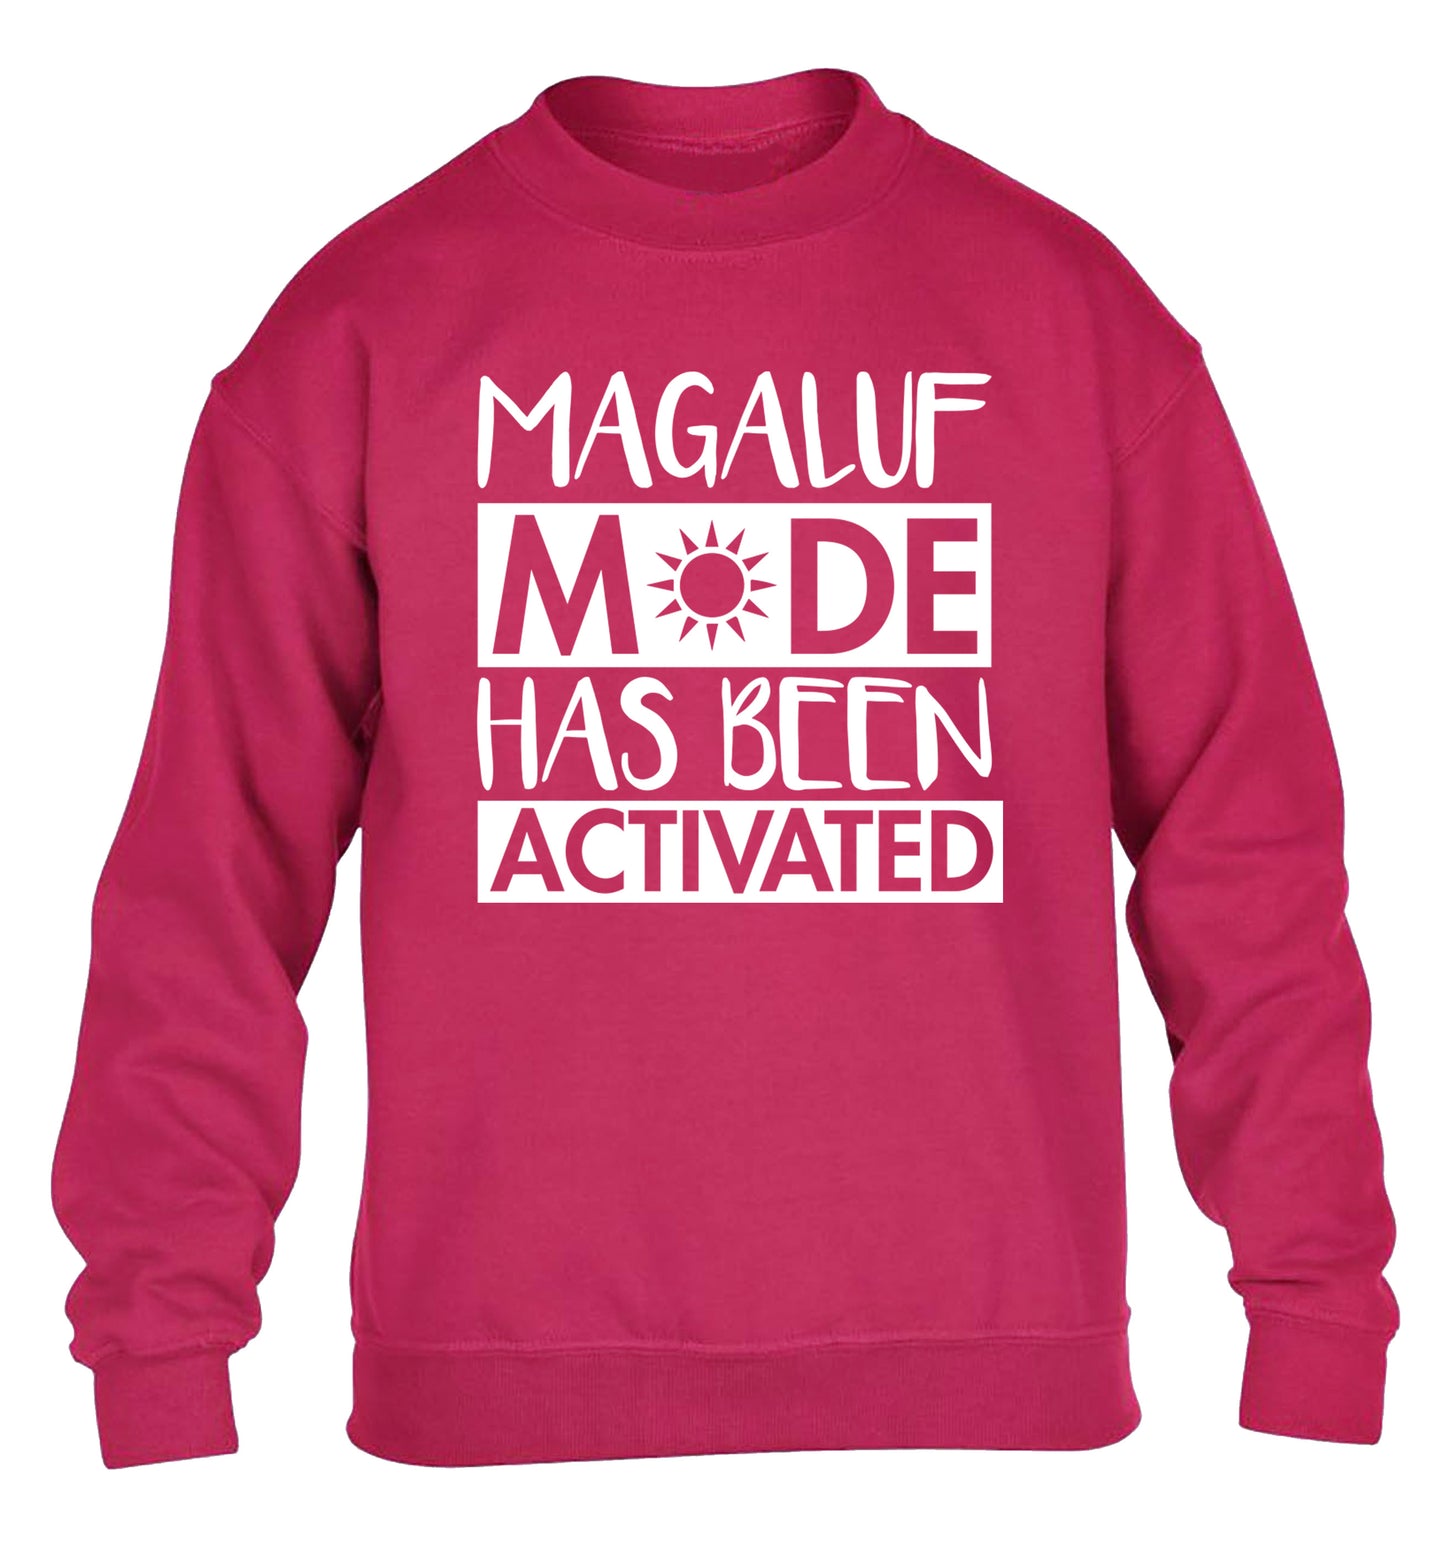 Magaluf mode has been activated children's pink sweater 12-13 Years